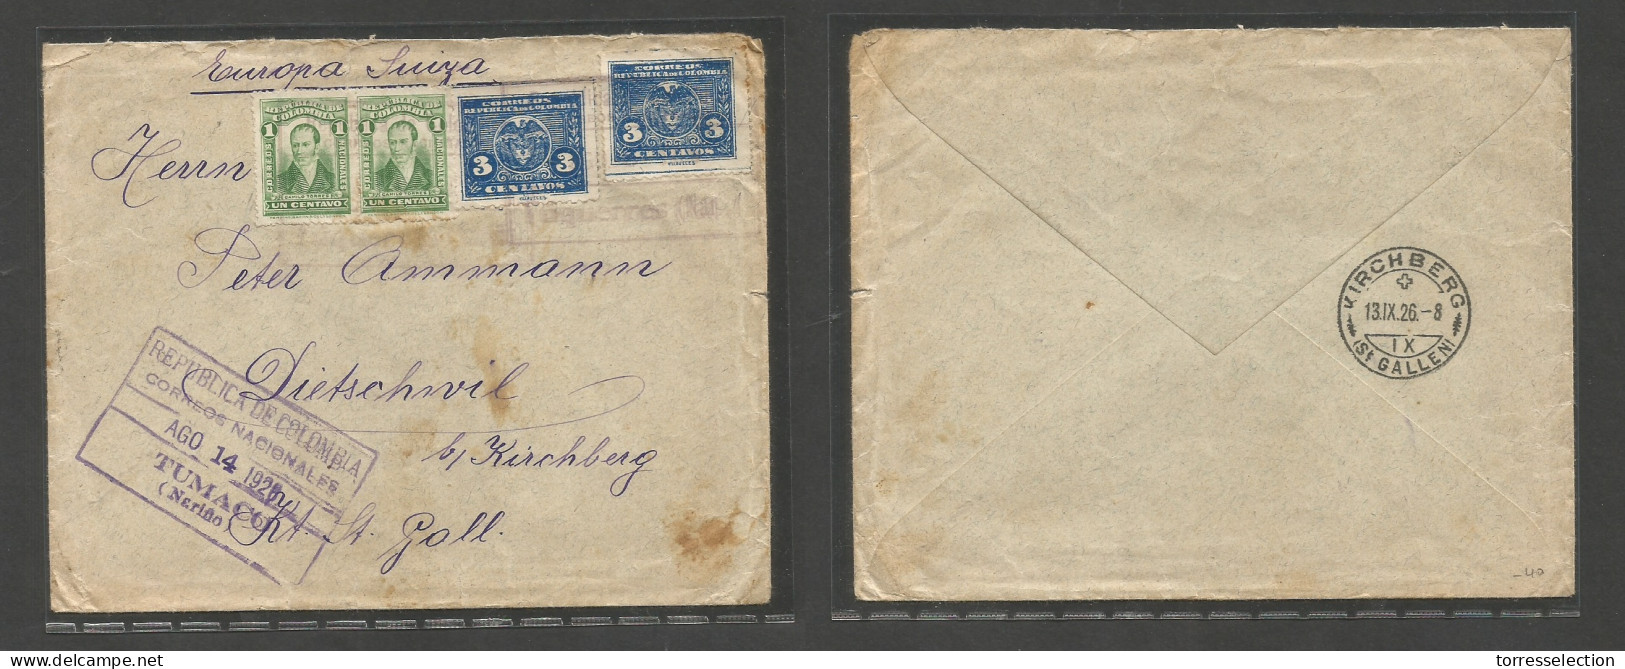 COLOMBIA. 1926 (14 Aug) Tumaco, Nariño - Switzerland, St. Gallen (13 Sept) Registered Multifkd Mixed Issues Env. Fine. S - Colombie